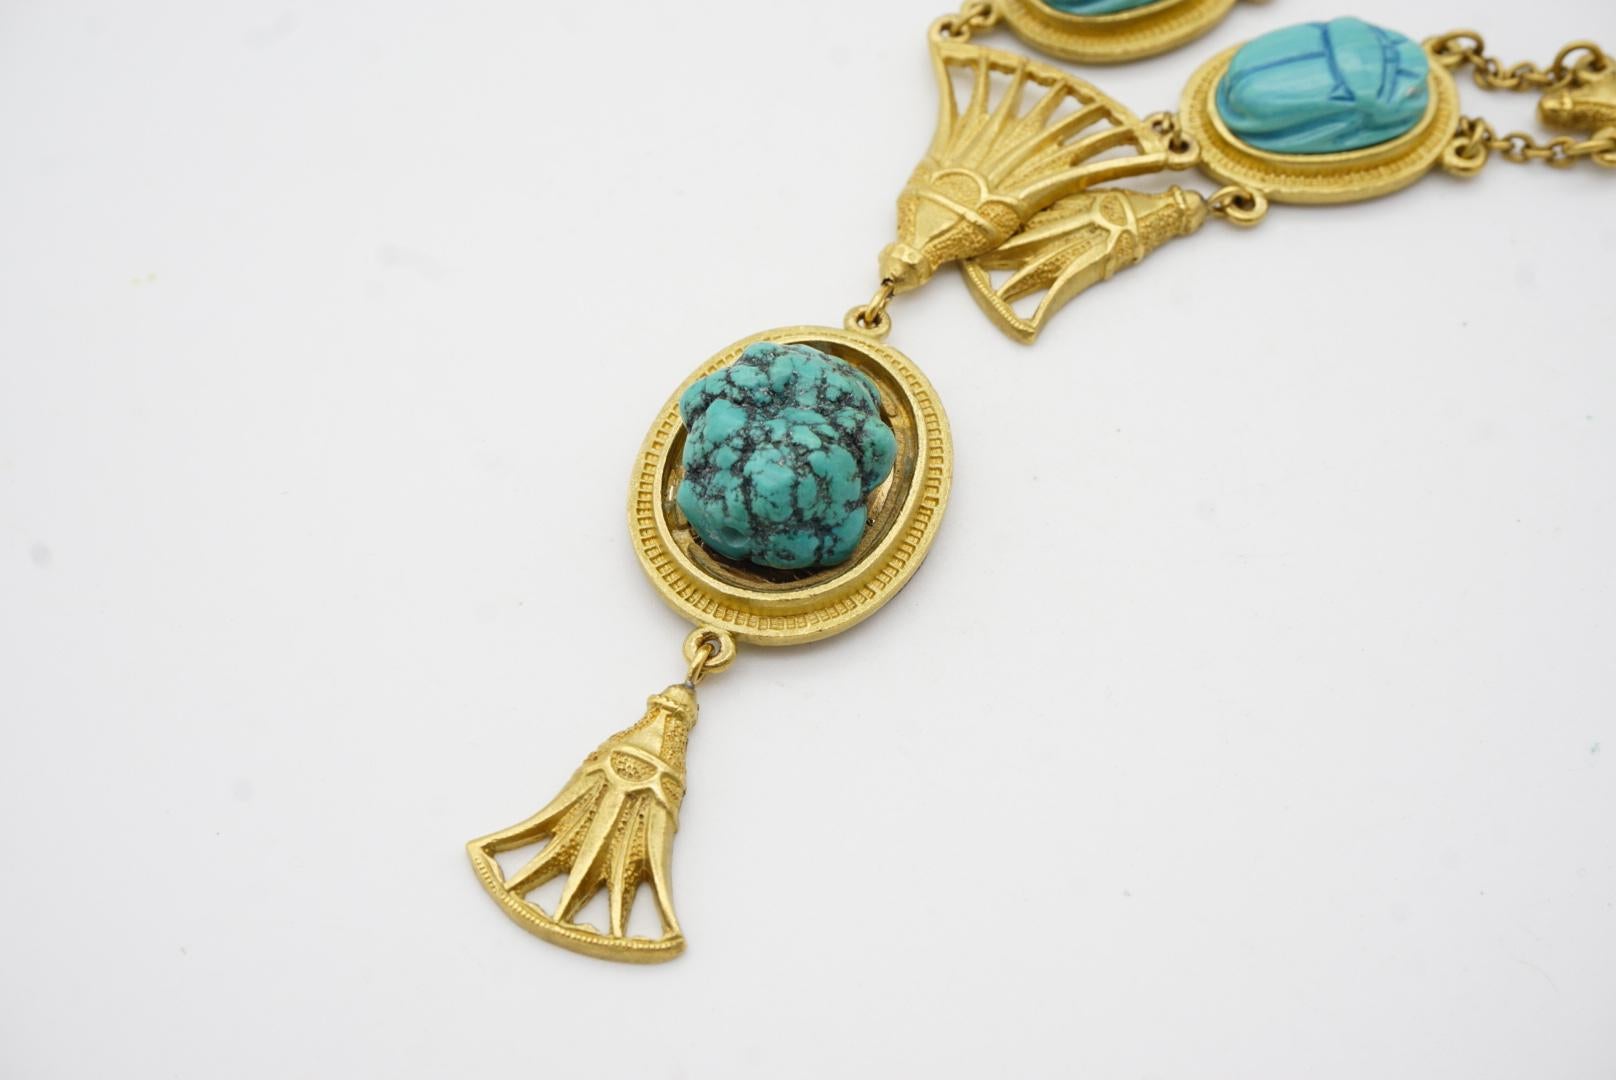 CHRISTIAN DIOR by John Galliano 2004 Egyptian Revival Turquoise Scarab Necklace For Sale 7